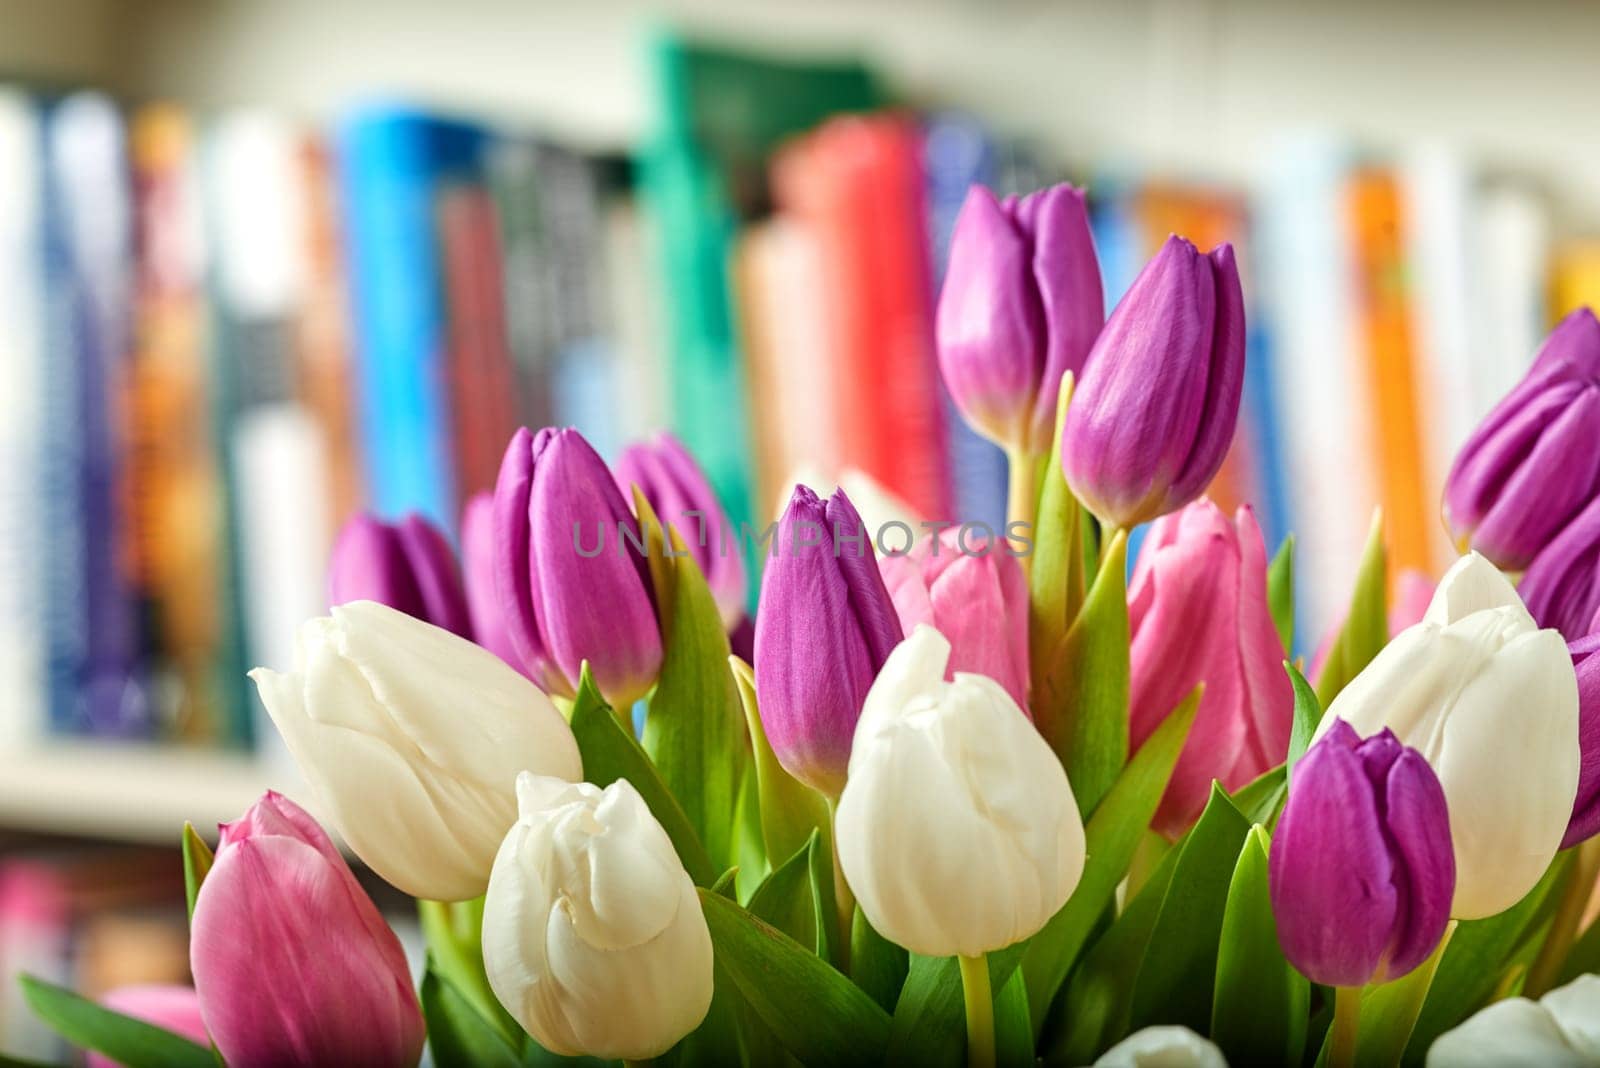 Fresh, flowers and tulips in home for decor, present or surprise by book shelf in house. Plants, petal and color floral for creativity as collection for wallpaper, screensaver and natural indoor.